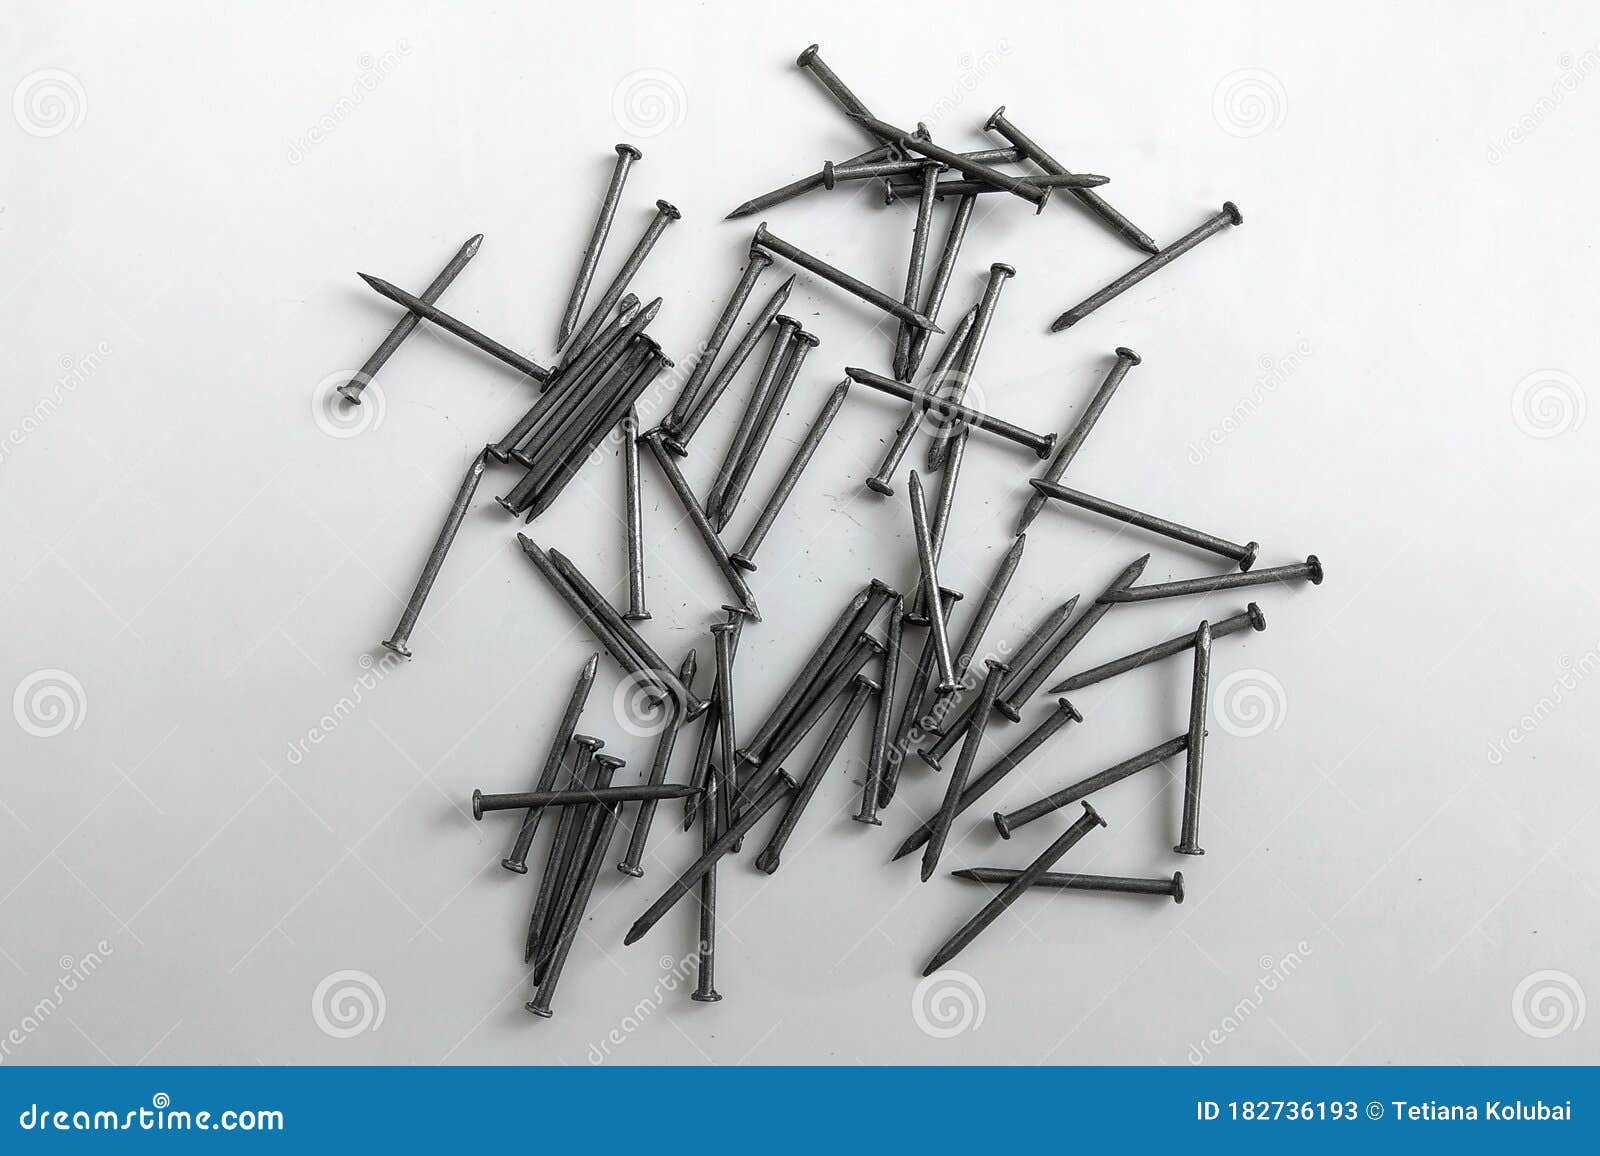 Nails on a Gray Background Top View. Stock Image - Image of carpentry ...